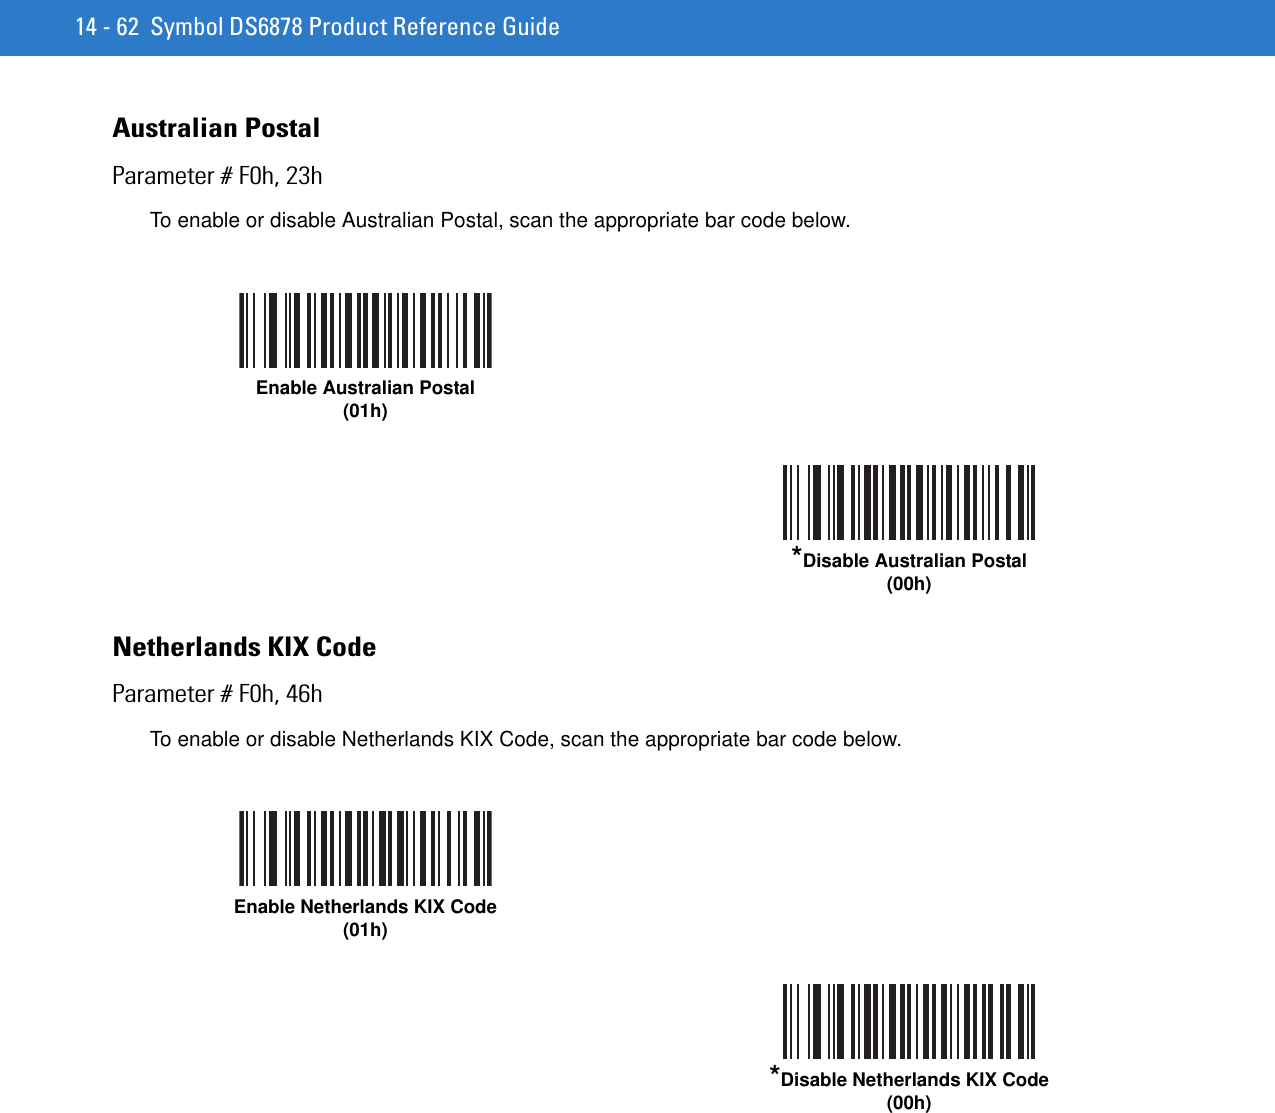 14 - 62 Symbol DS6878 Product Reference GuideAustralian PostalParameter # F0h, 23hTo enable or disable Australian Postal, scan the appropriate bar code below.Netherlands KIX Code Parameter # F0h, 46hTo enable or disable Netherlands KIX Code, scan the appropriate bar code below.Enable Australian Postal(01h)*Disable Australian Postal(00h)Enable Netherlands KIX Code(01h)*Disable Netherlands KIX Code(00h)